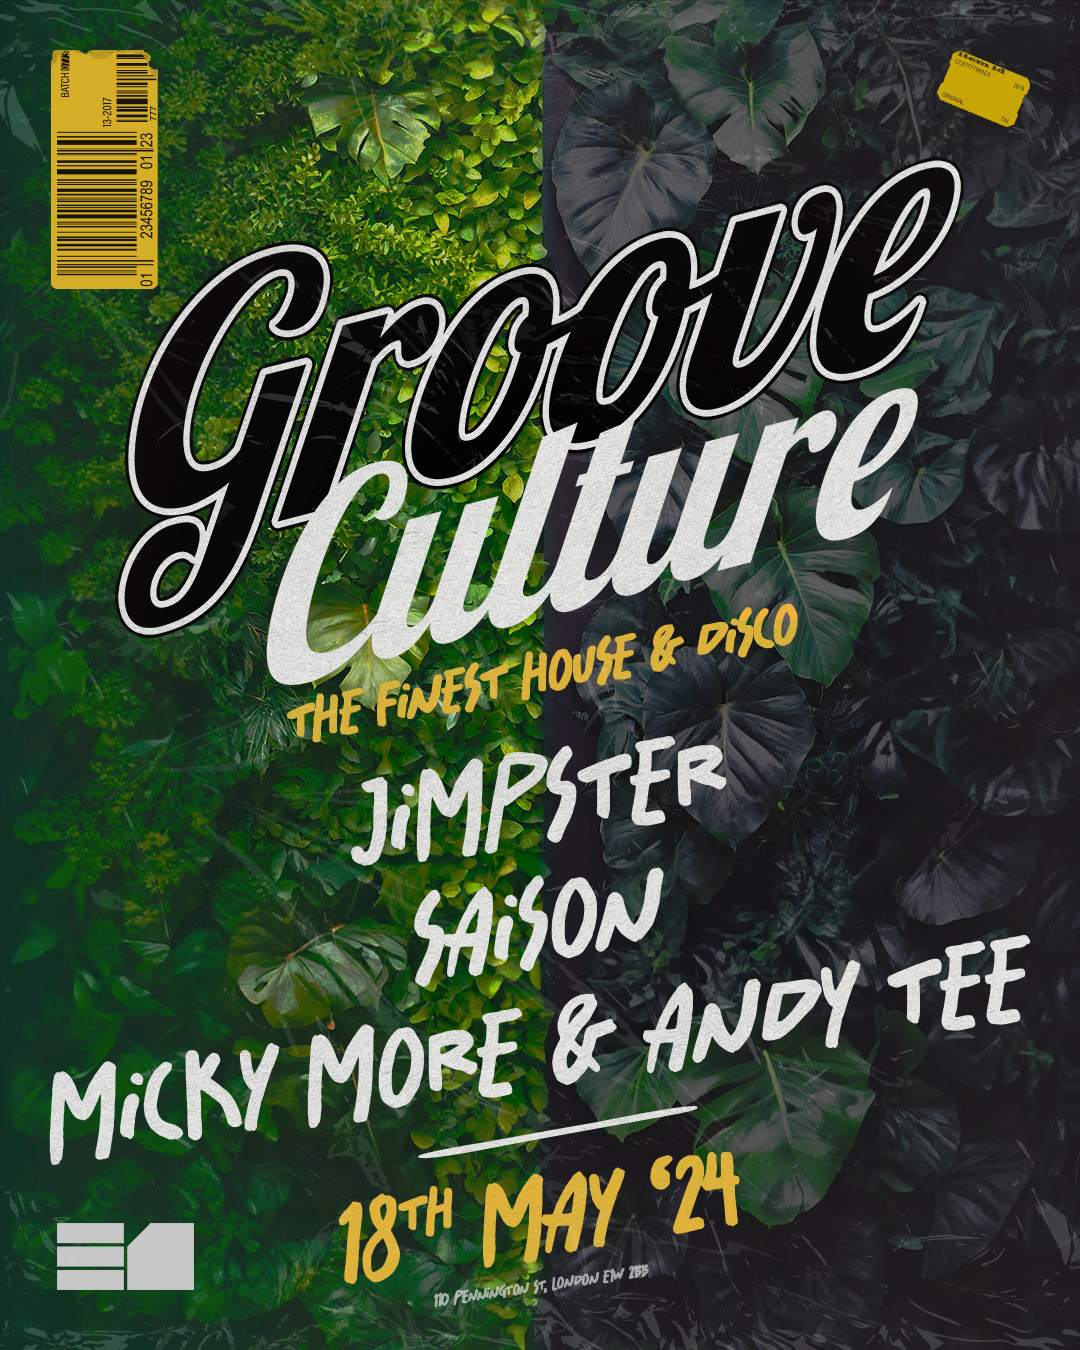 Groove Culture: Jimpster, Saison, Micky More & Andy Tee - Página trasera